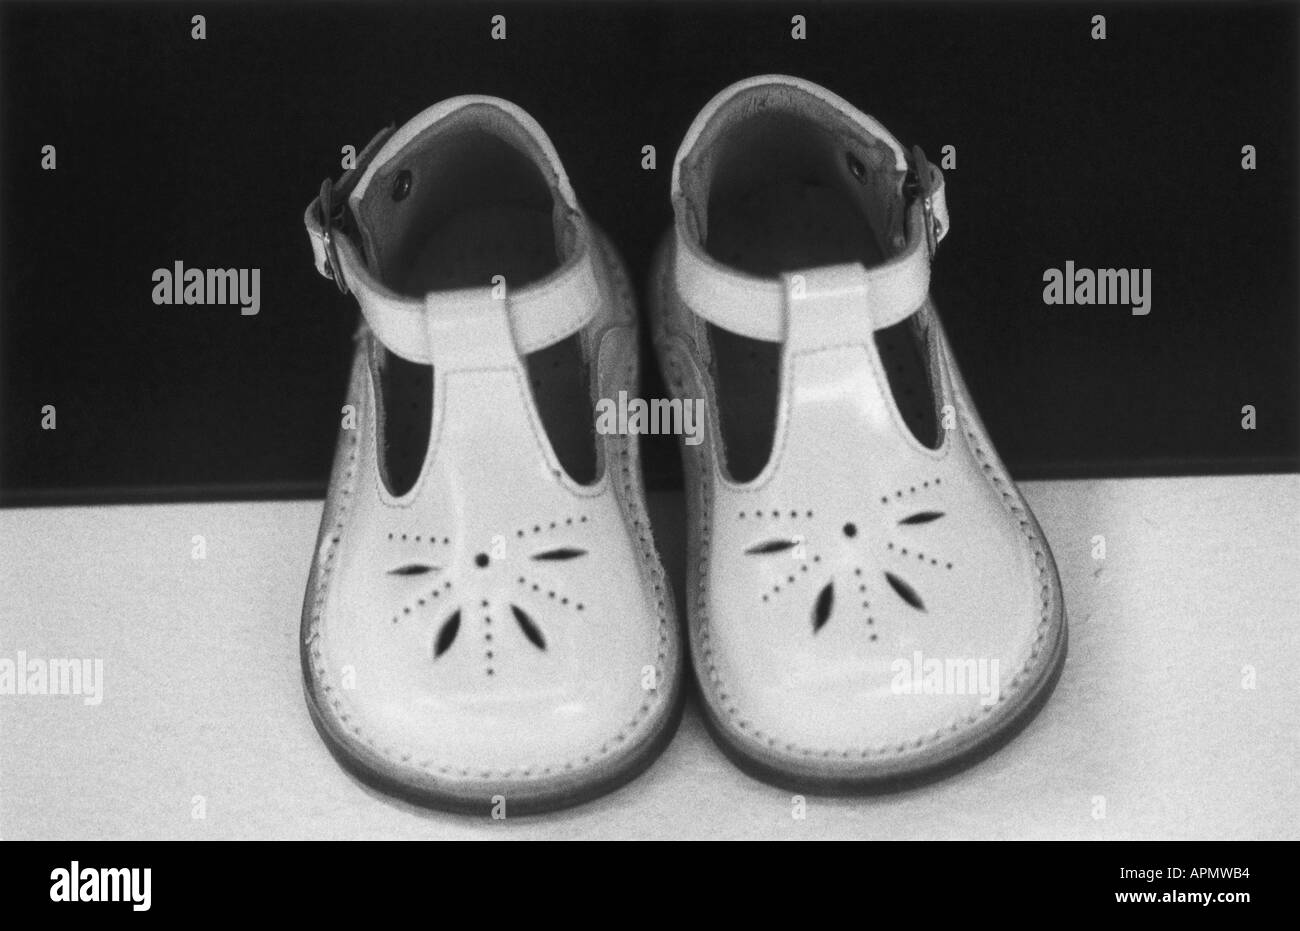 Pair of shoes for a child Stock Photo